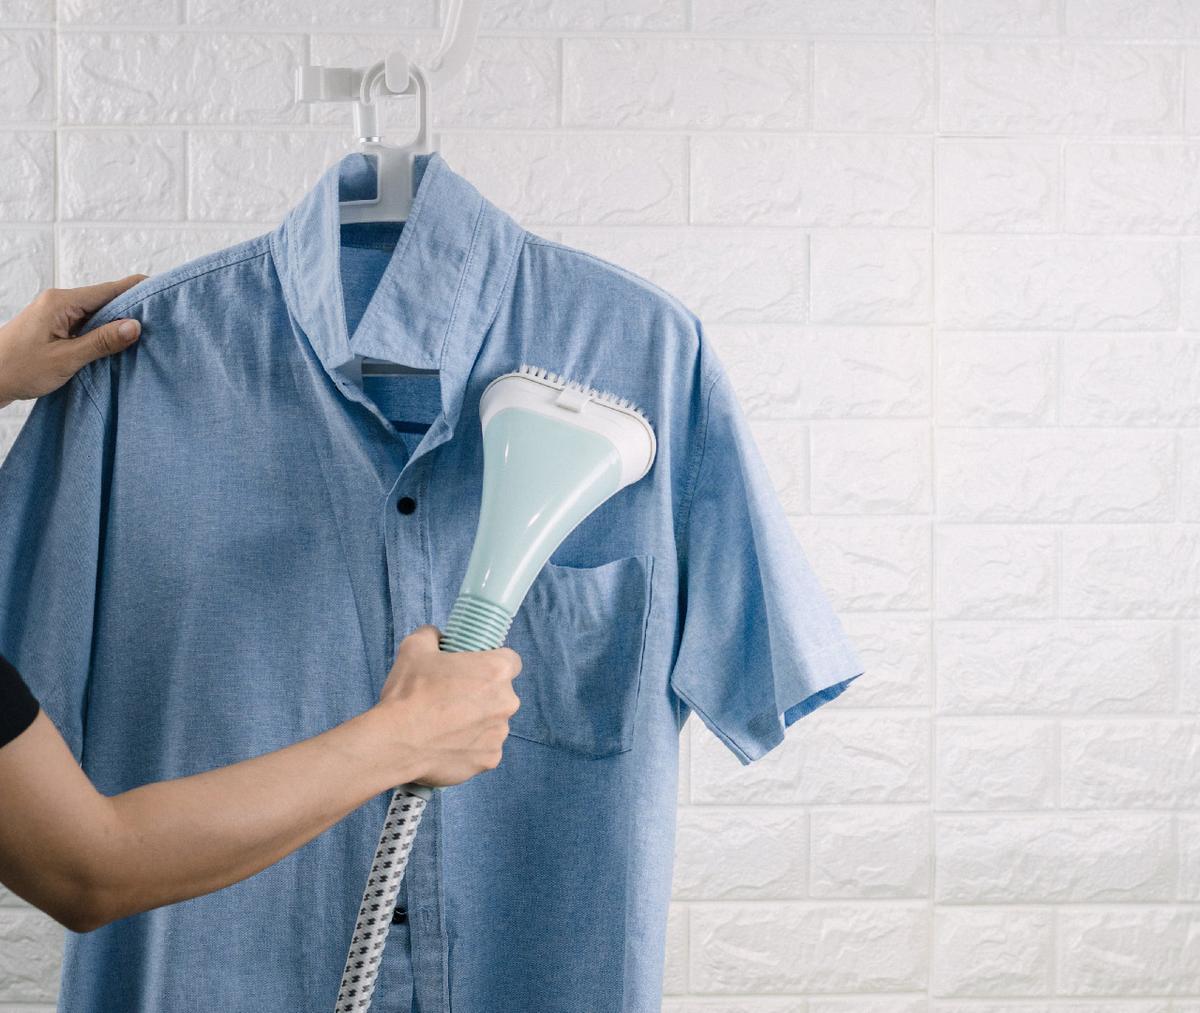 Shirt dry cleaning